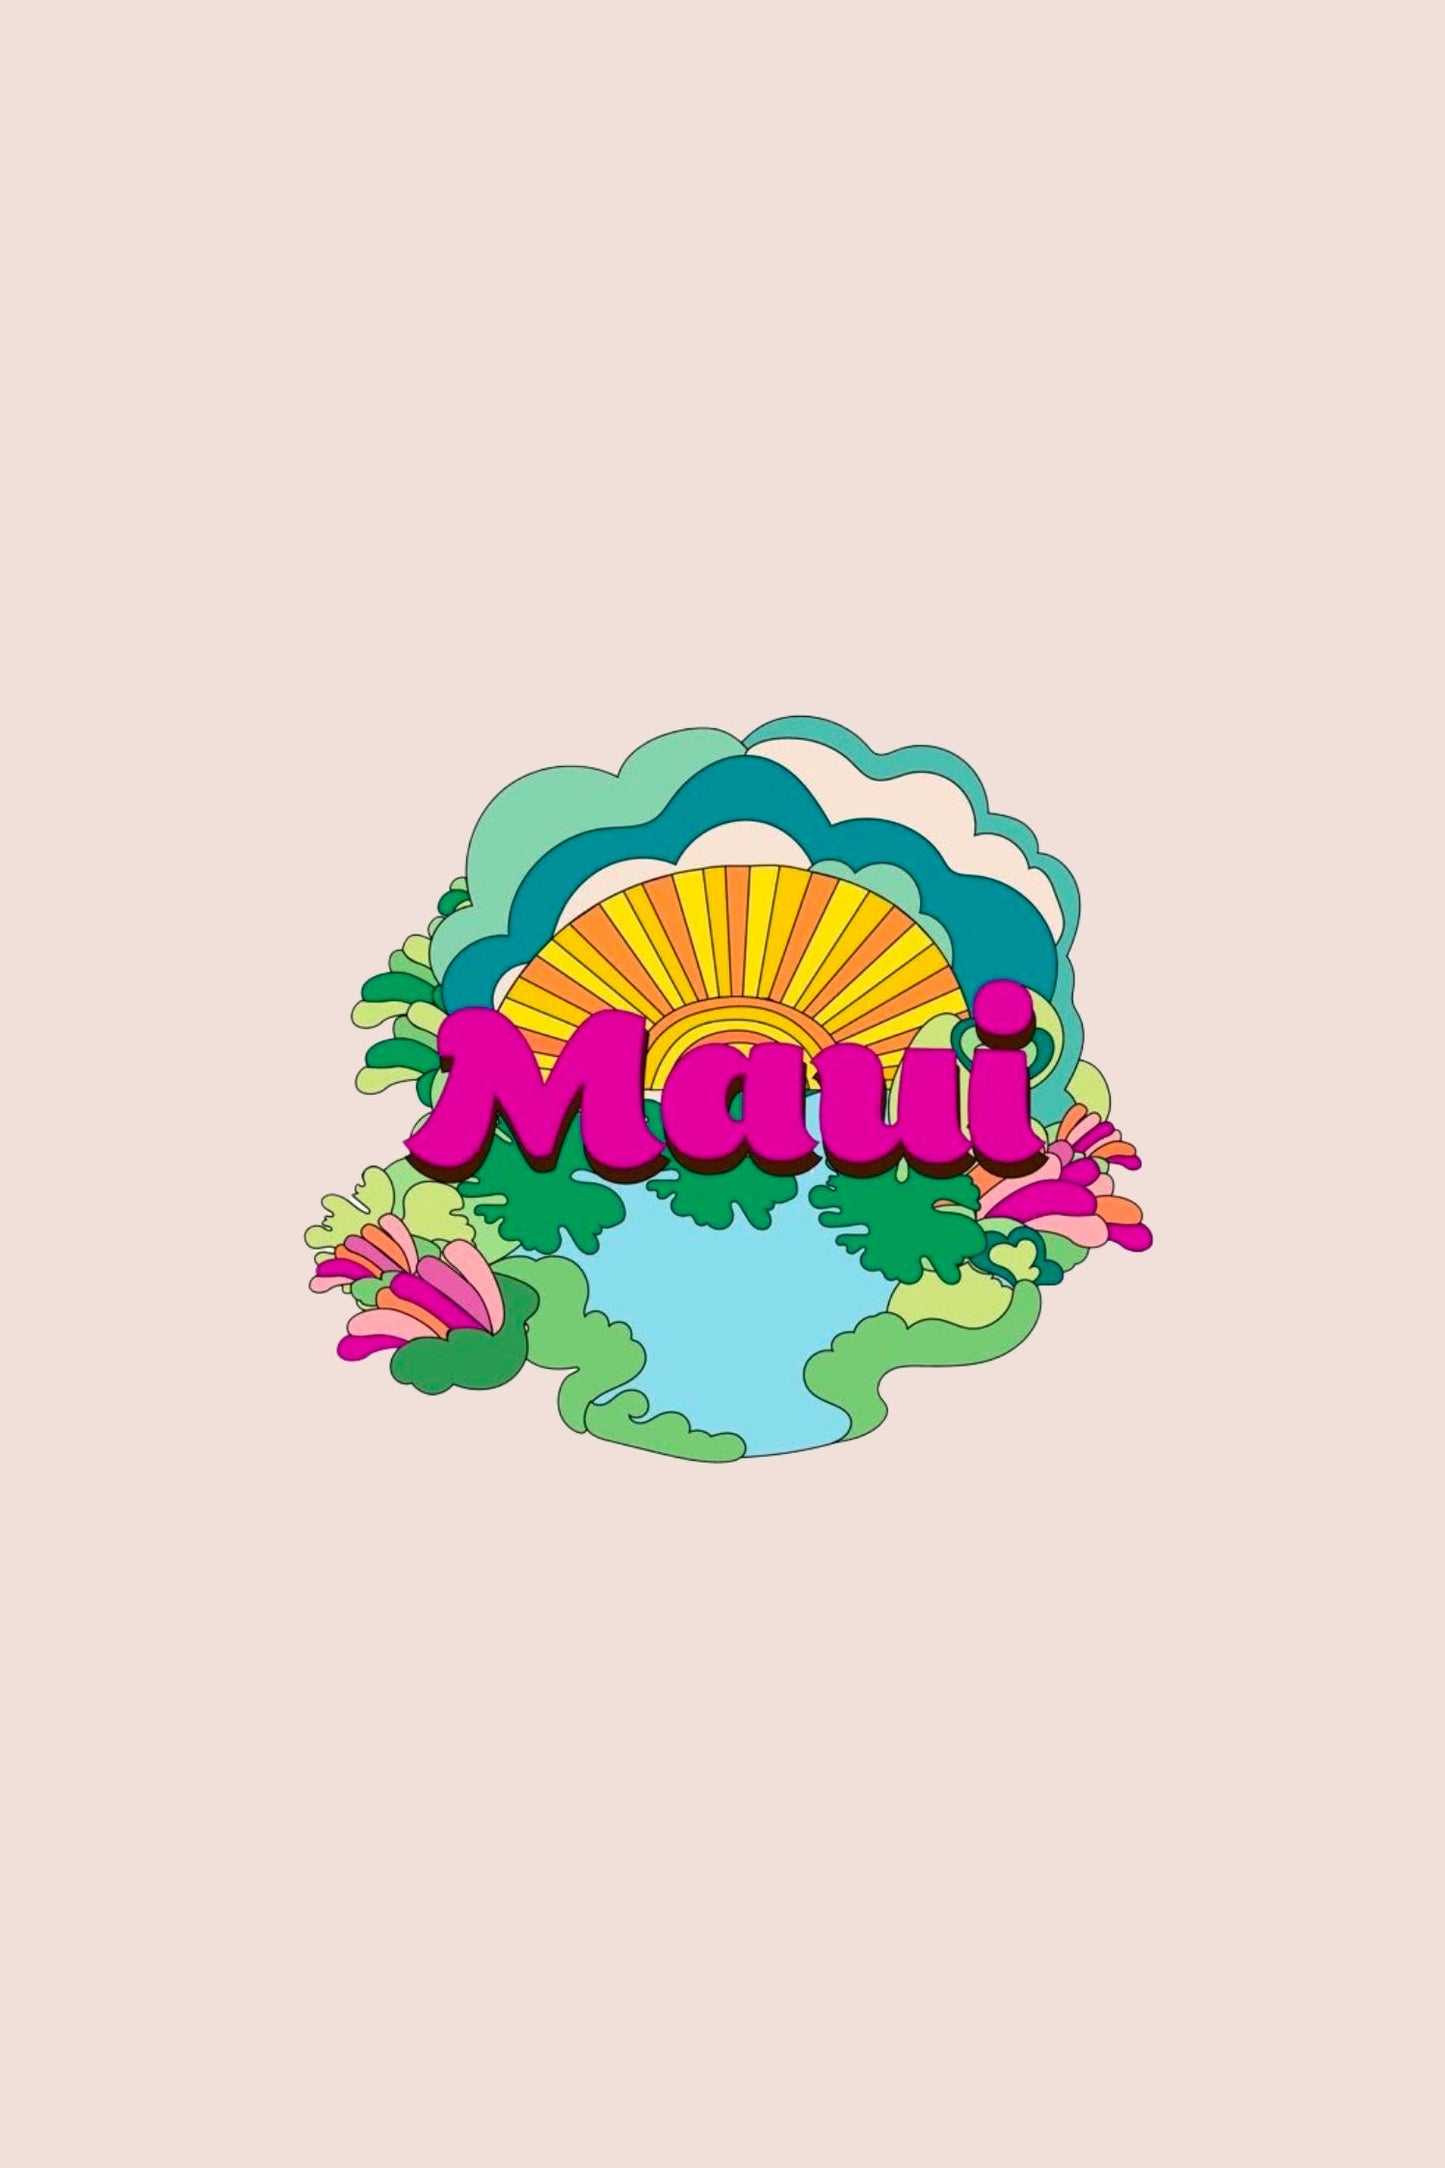 Stylized Hawaiian background, blue clouds, rainbow, sea, green areas, MAUI in big letters on top